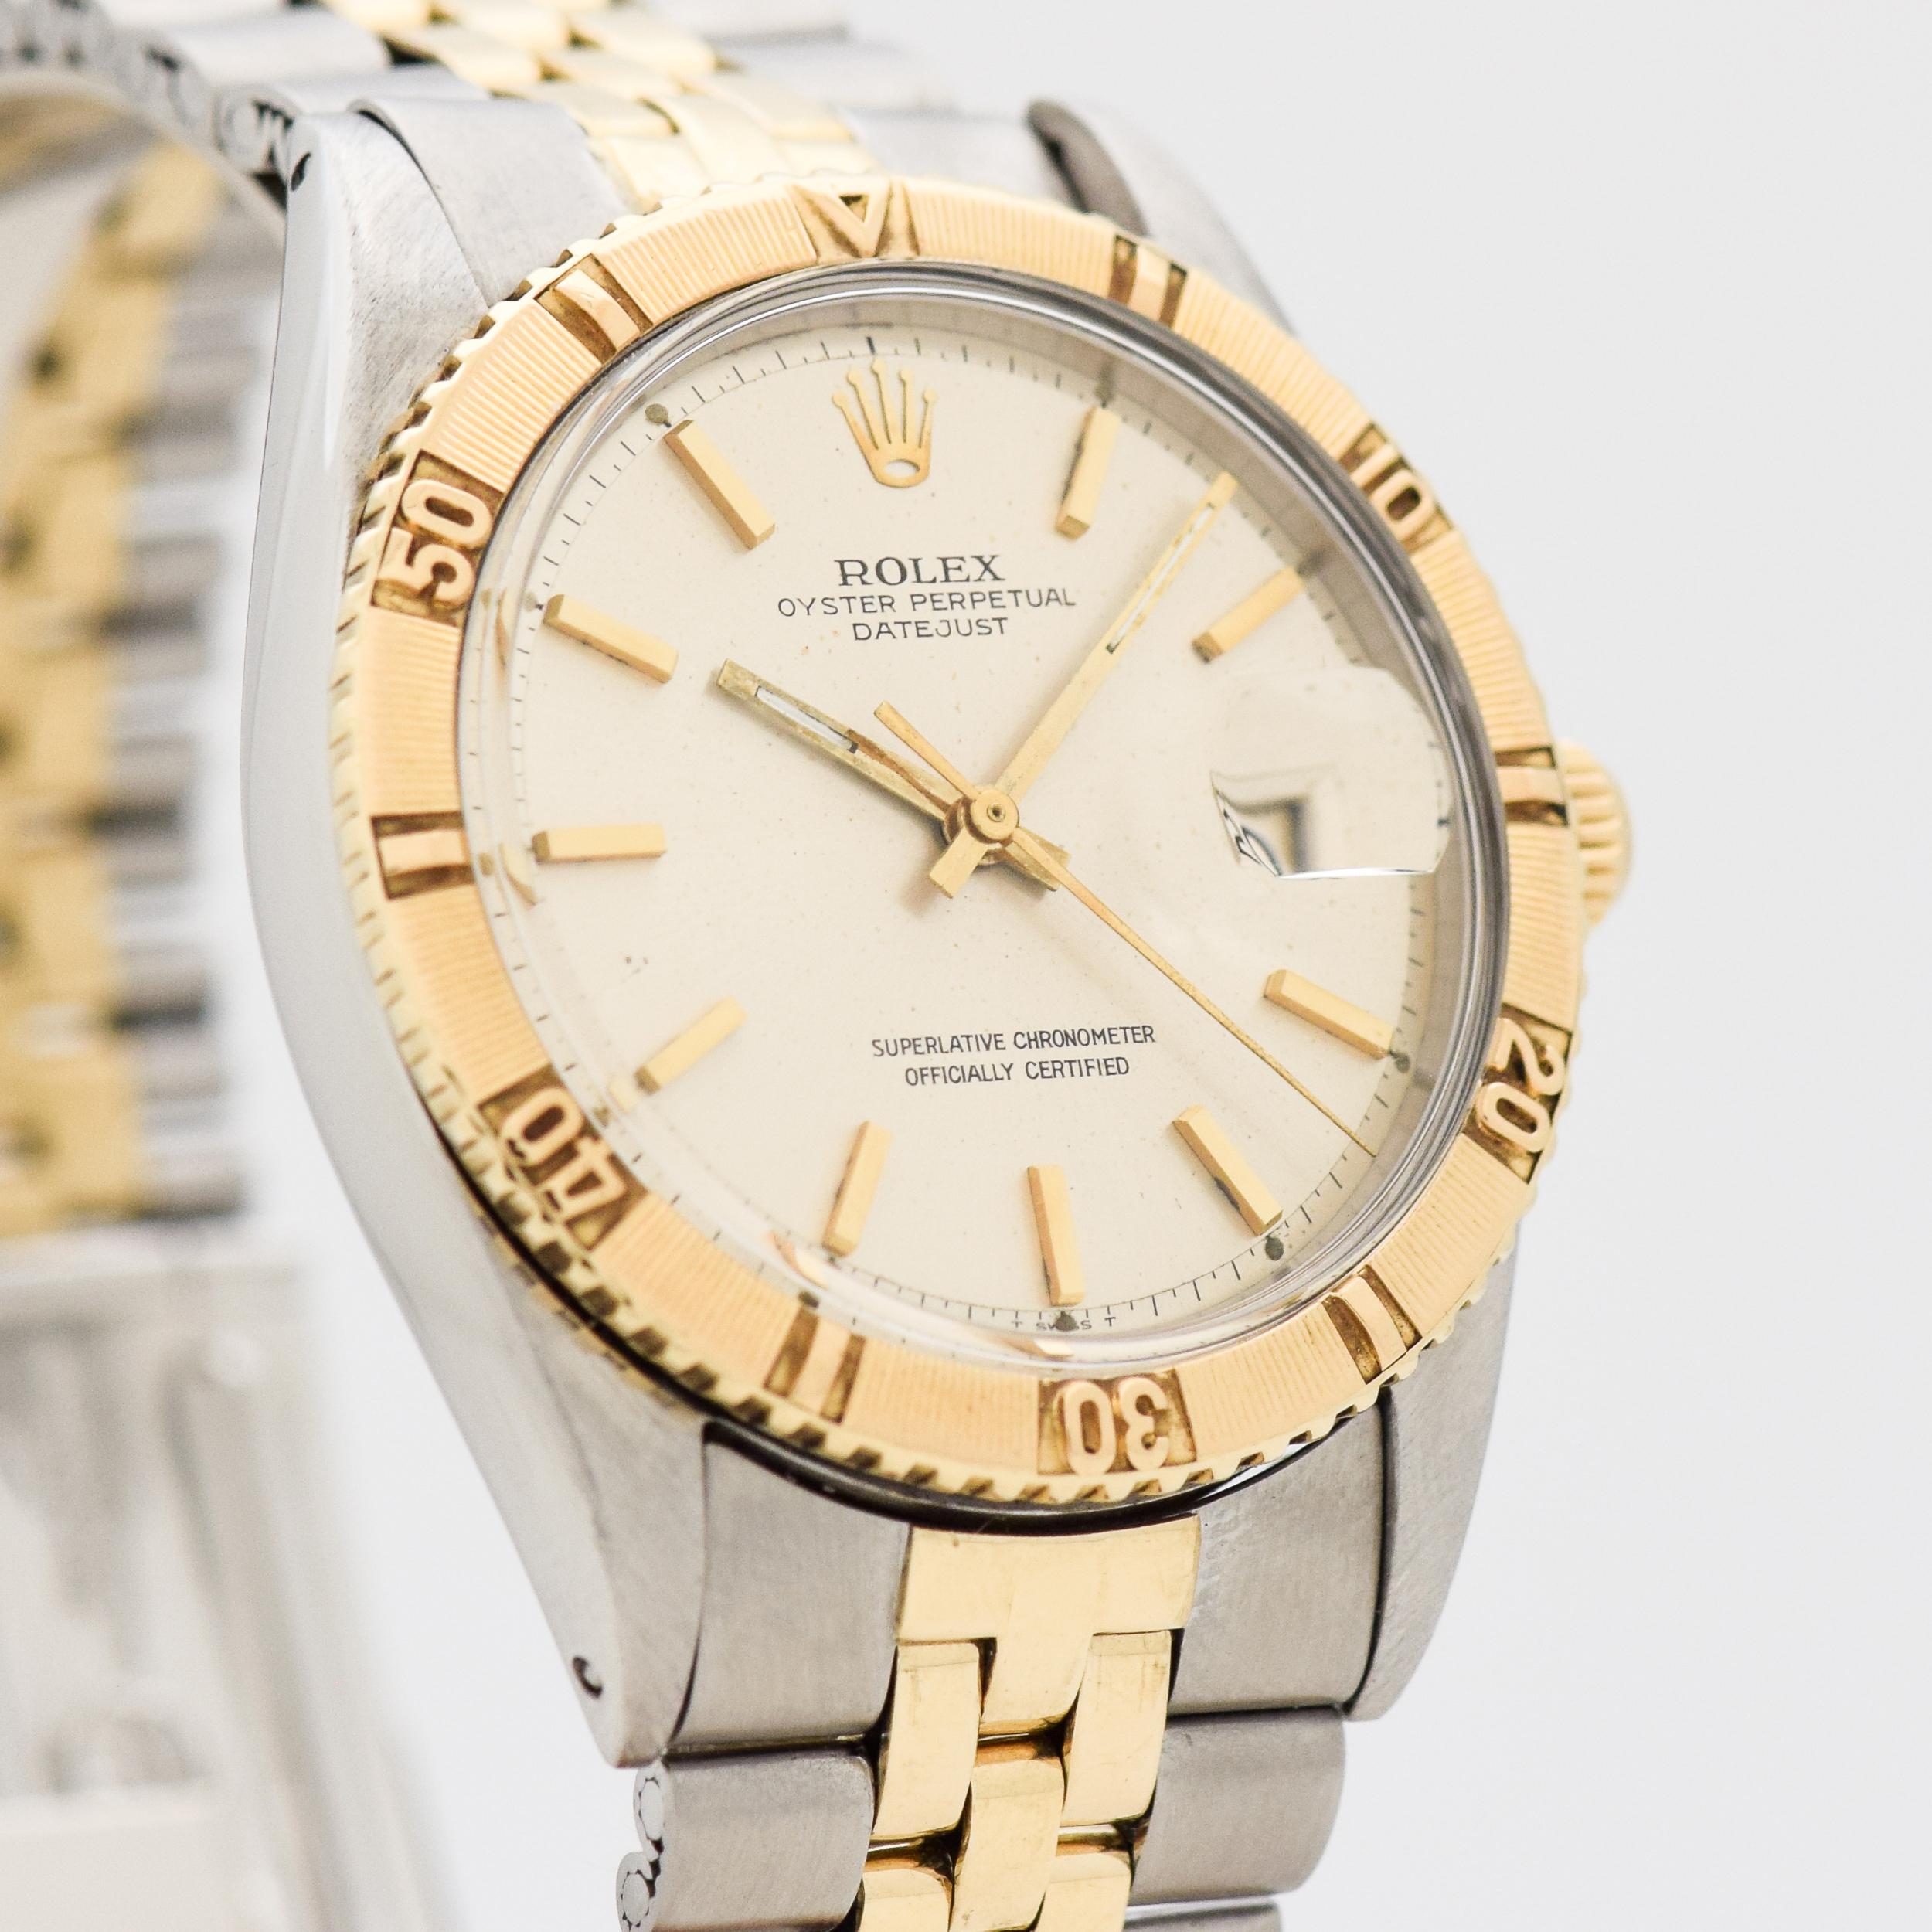 1968 Vintage Rolex Thunderbird Turn-O-Graph Bezel Datejust Ref. 1625 Two Tone 14k Yellow Gold and Stainless Steel watch with Original Silver Dial with Attached Gold Stick/Bar/Baton Markers with Two Tone 14k Yellow Gold and Stainless Steel Jubilee